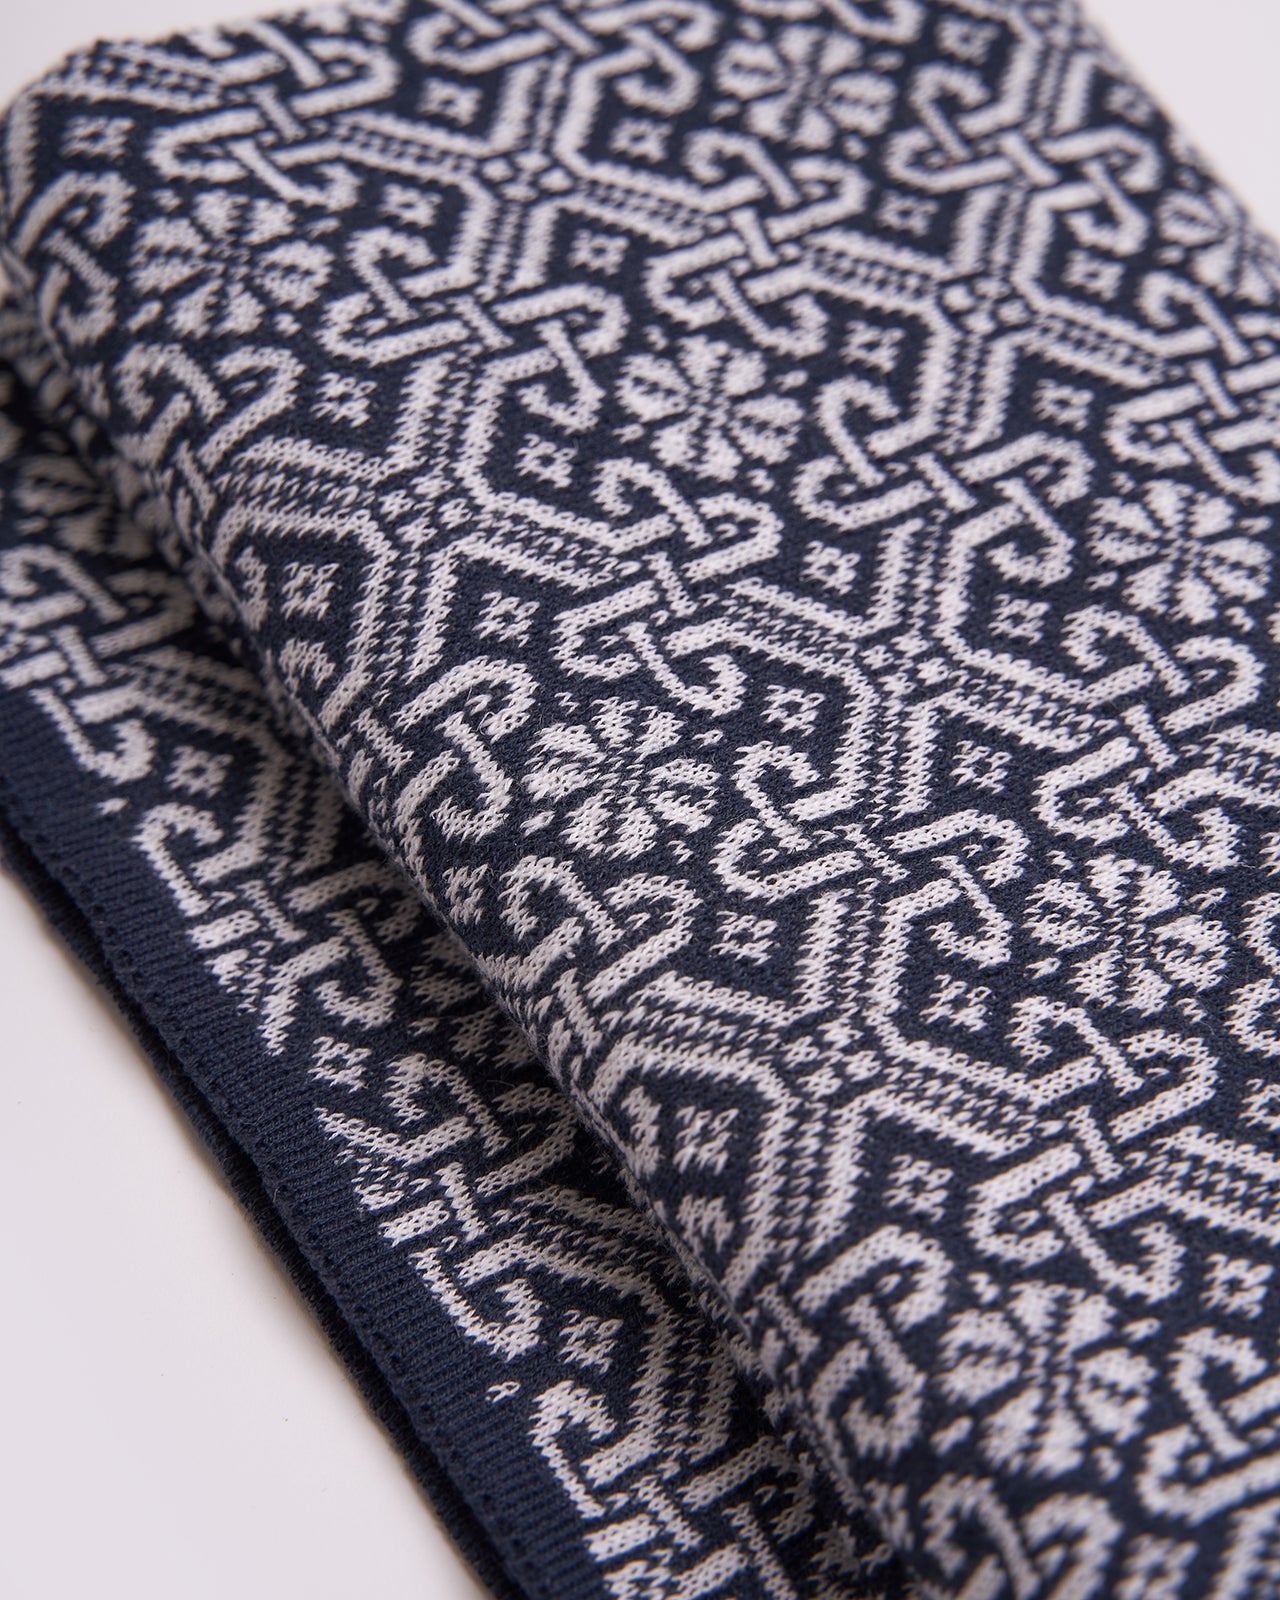 legant navy blue scarf with a detailed brown geometric pattern and solid brown edges, displayed on a white background, showcasing the intricate design and sophisticated style